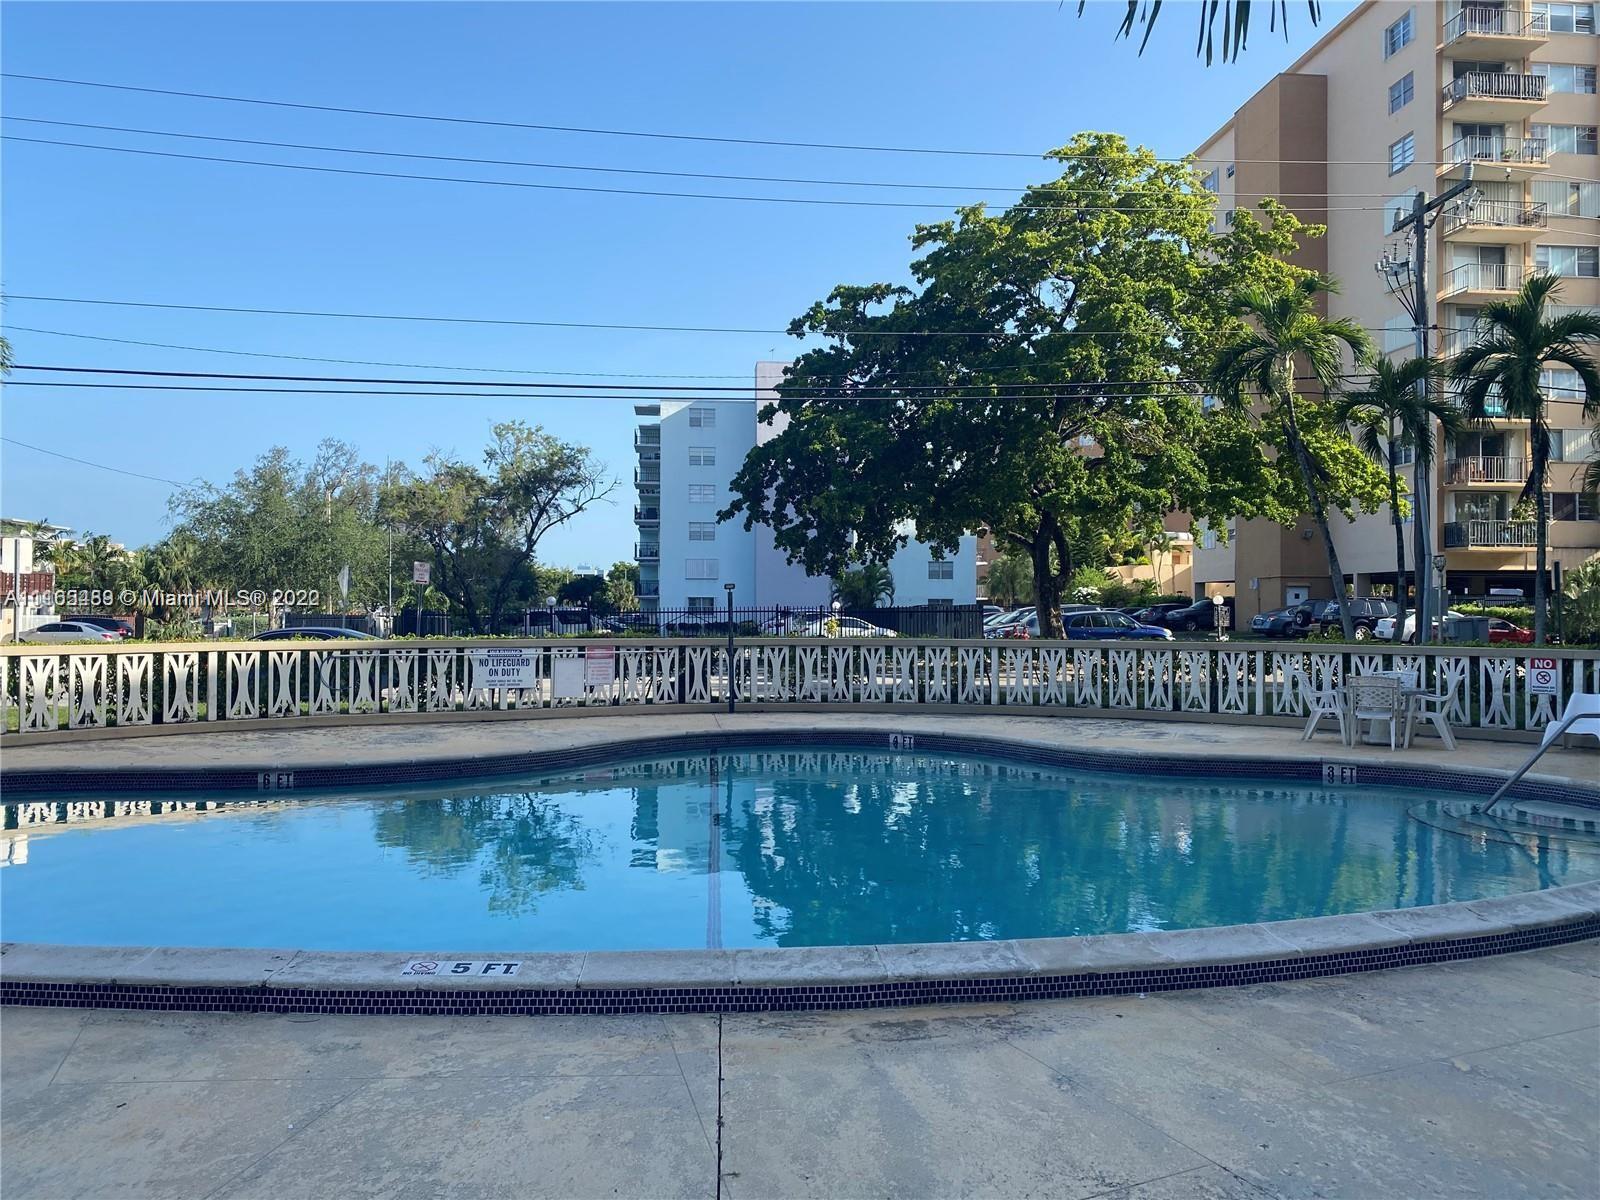 a view of a swimming pool and outdoor space